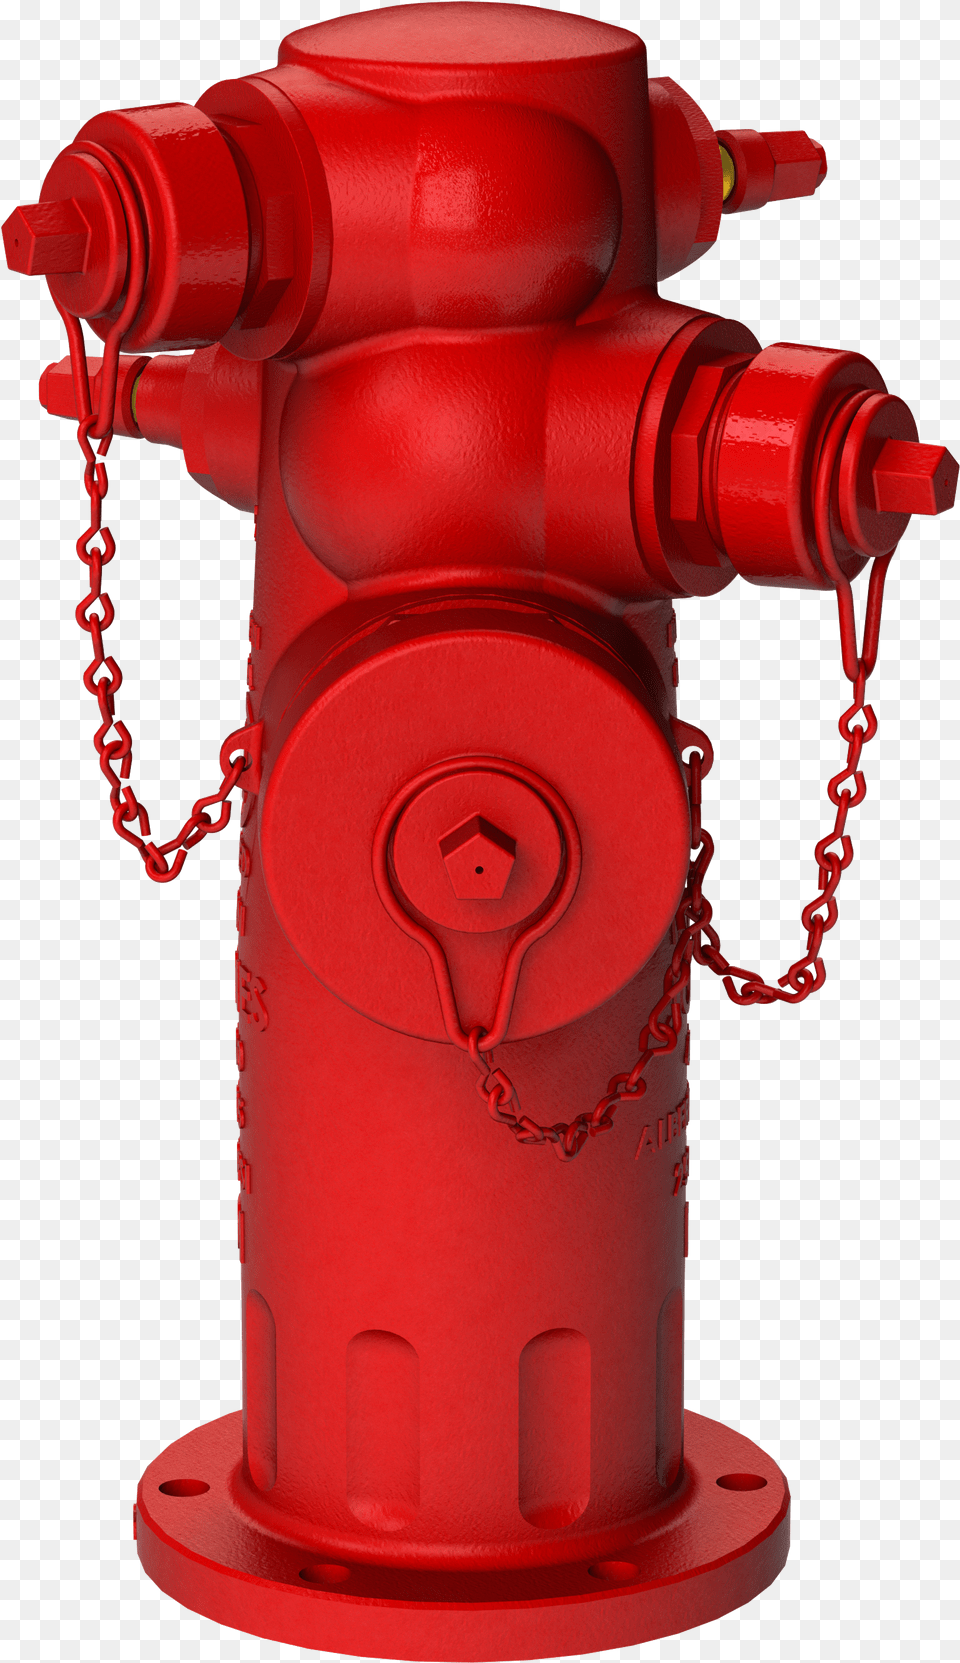 Hydrant Hd Hdpng Images Pluspng Fire Hydrant Png Image